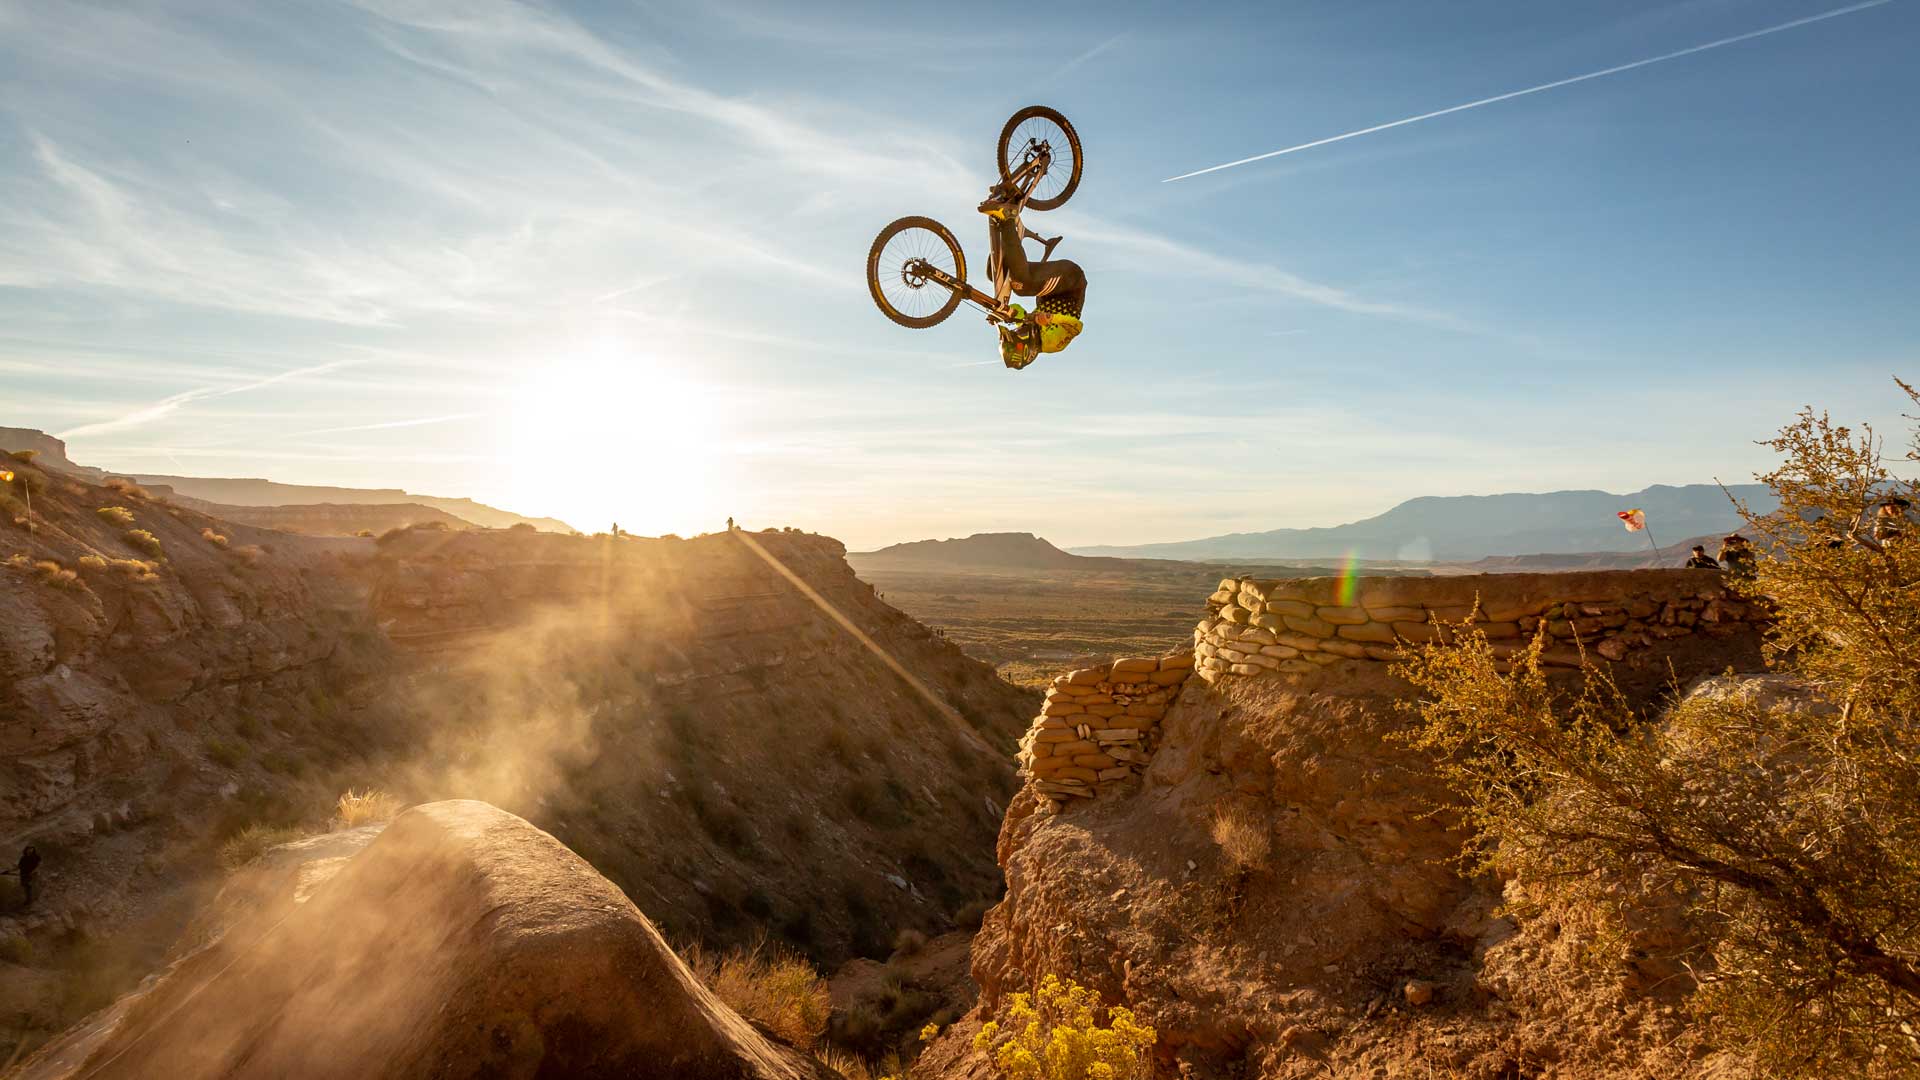 Red Bull Rampage A Unique Story From Behind the Lens